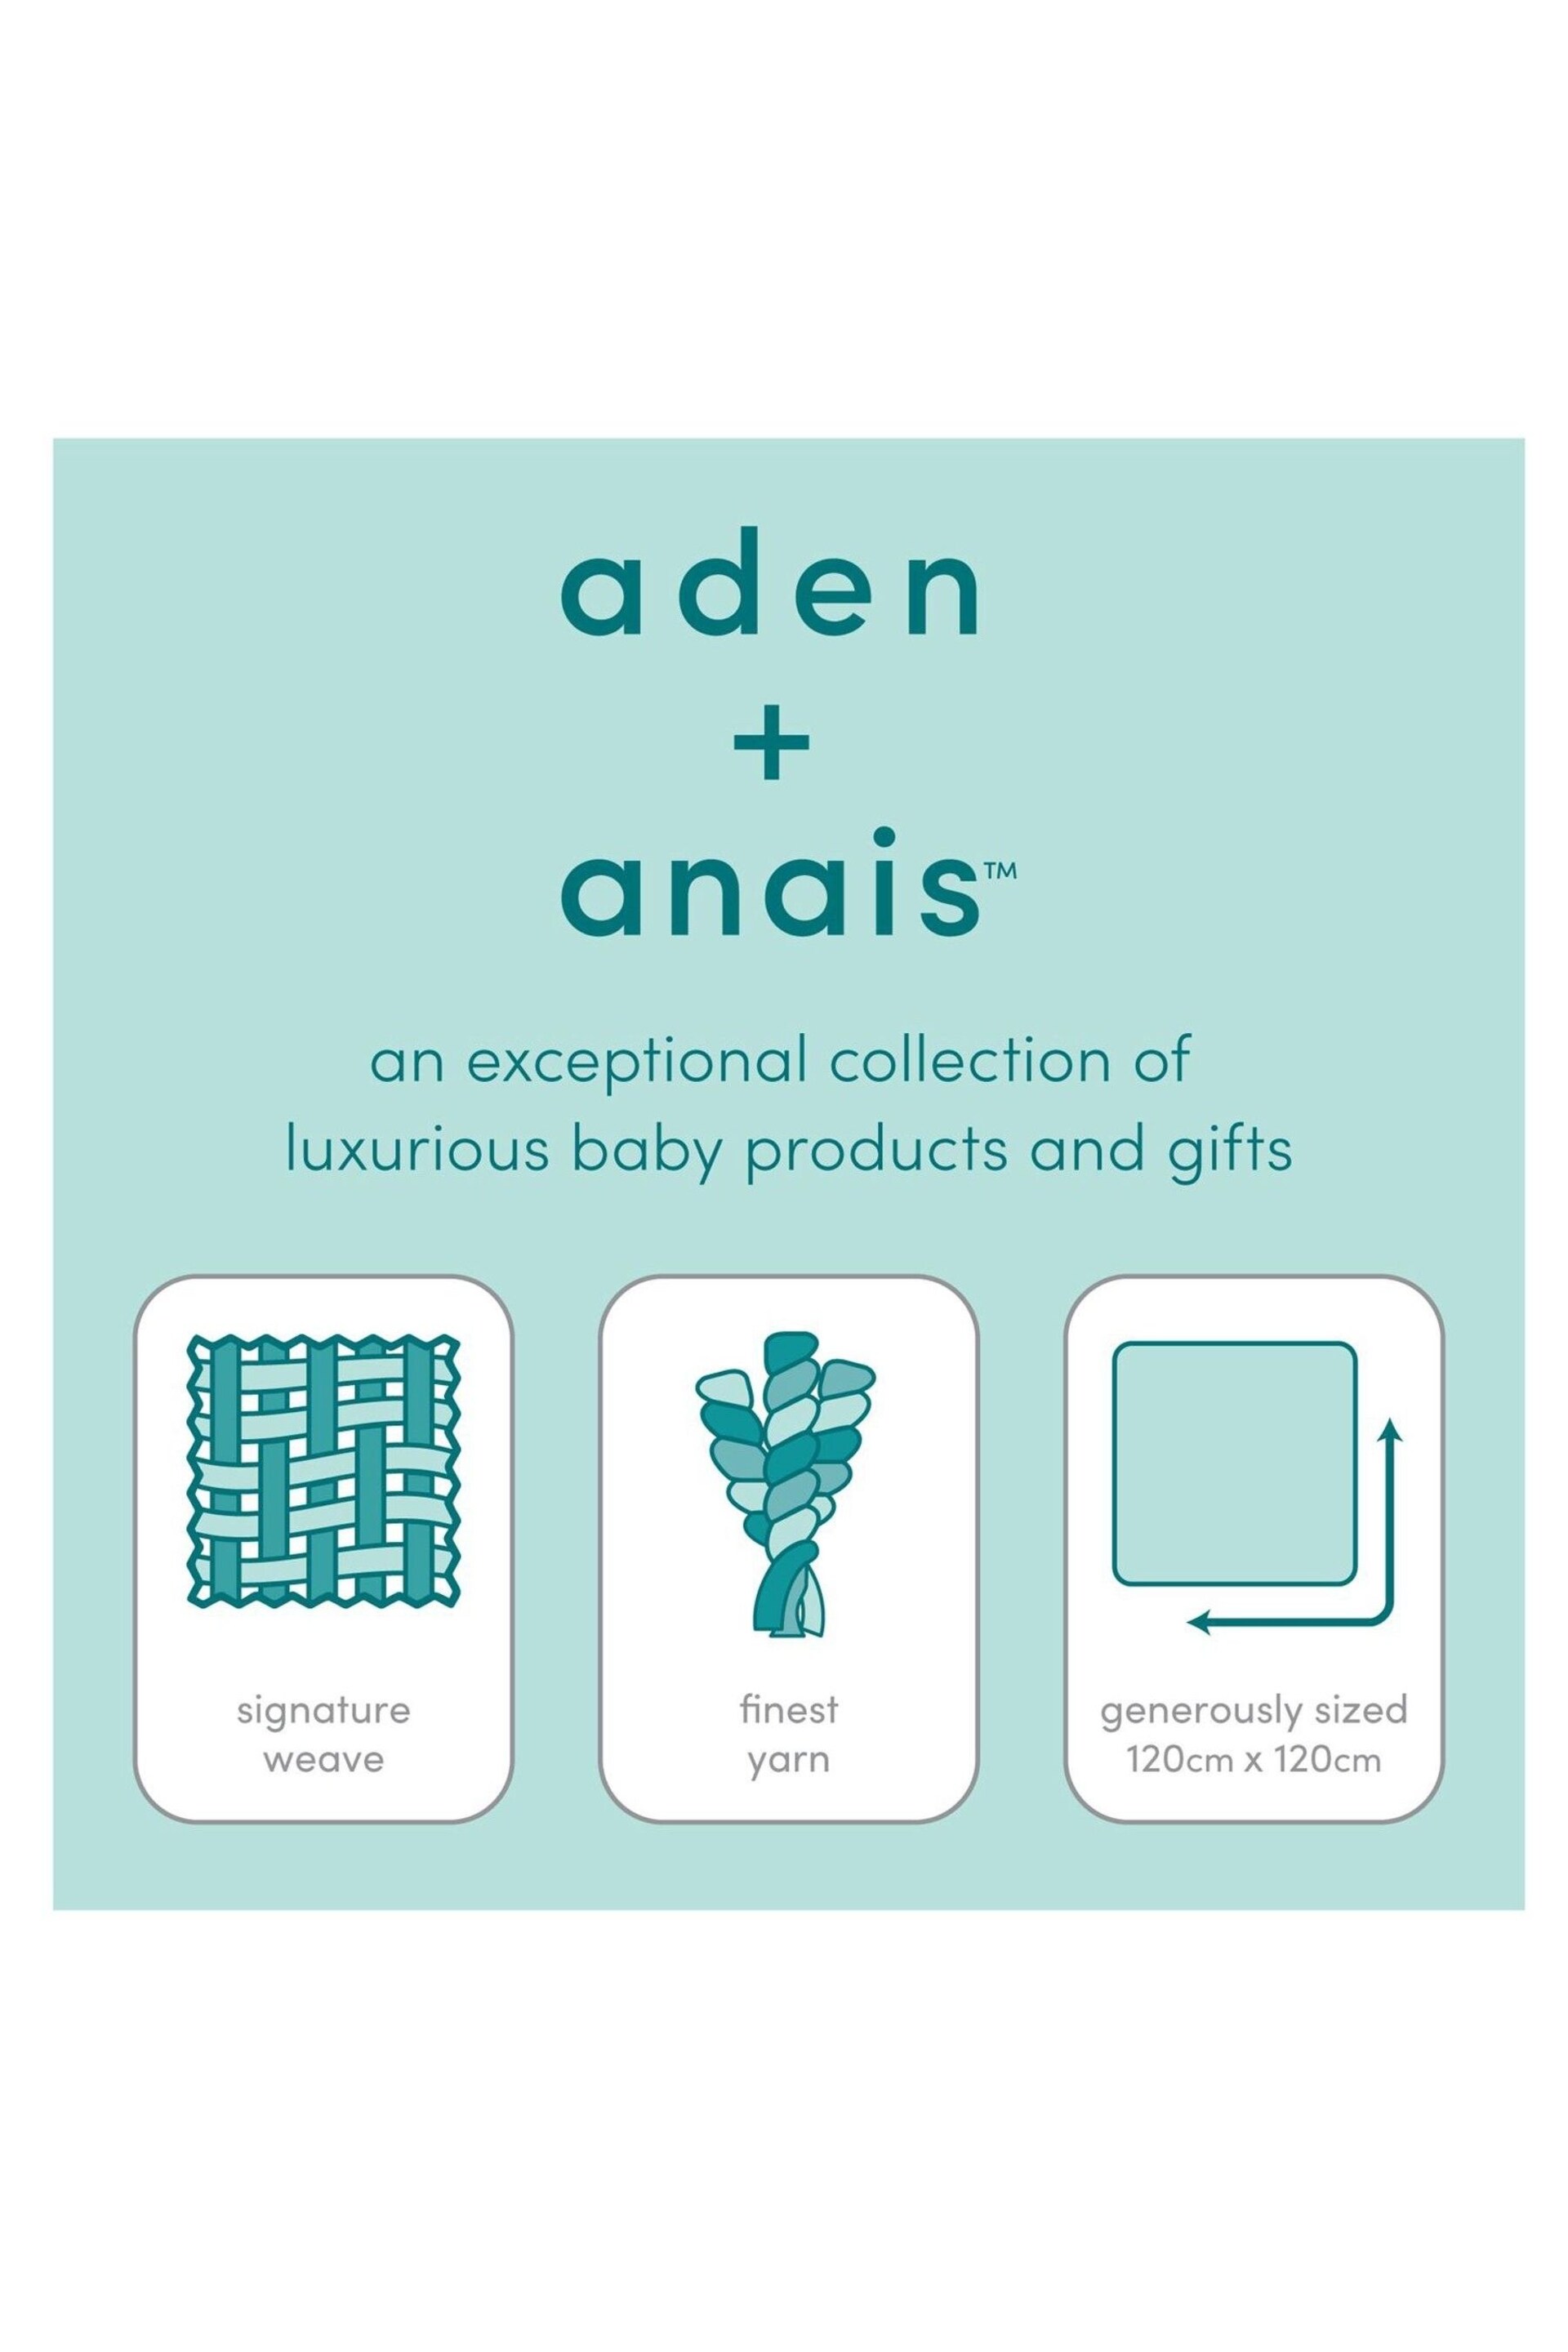 aden + anais jungle jam Large Cotton Muslin Blankets 4 Pack - Image 2 of 6